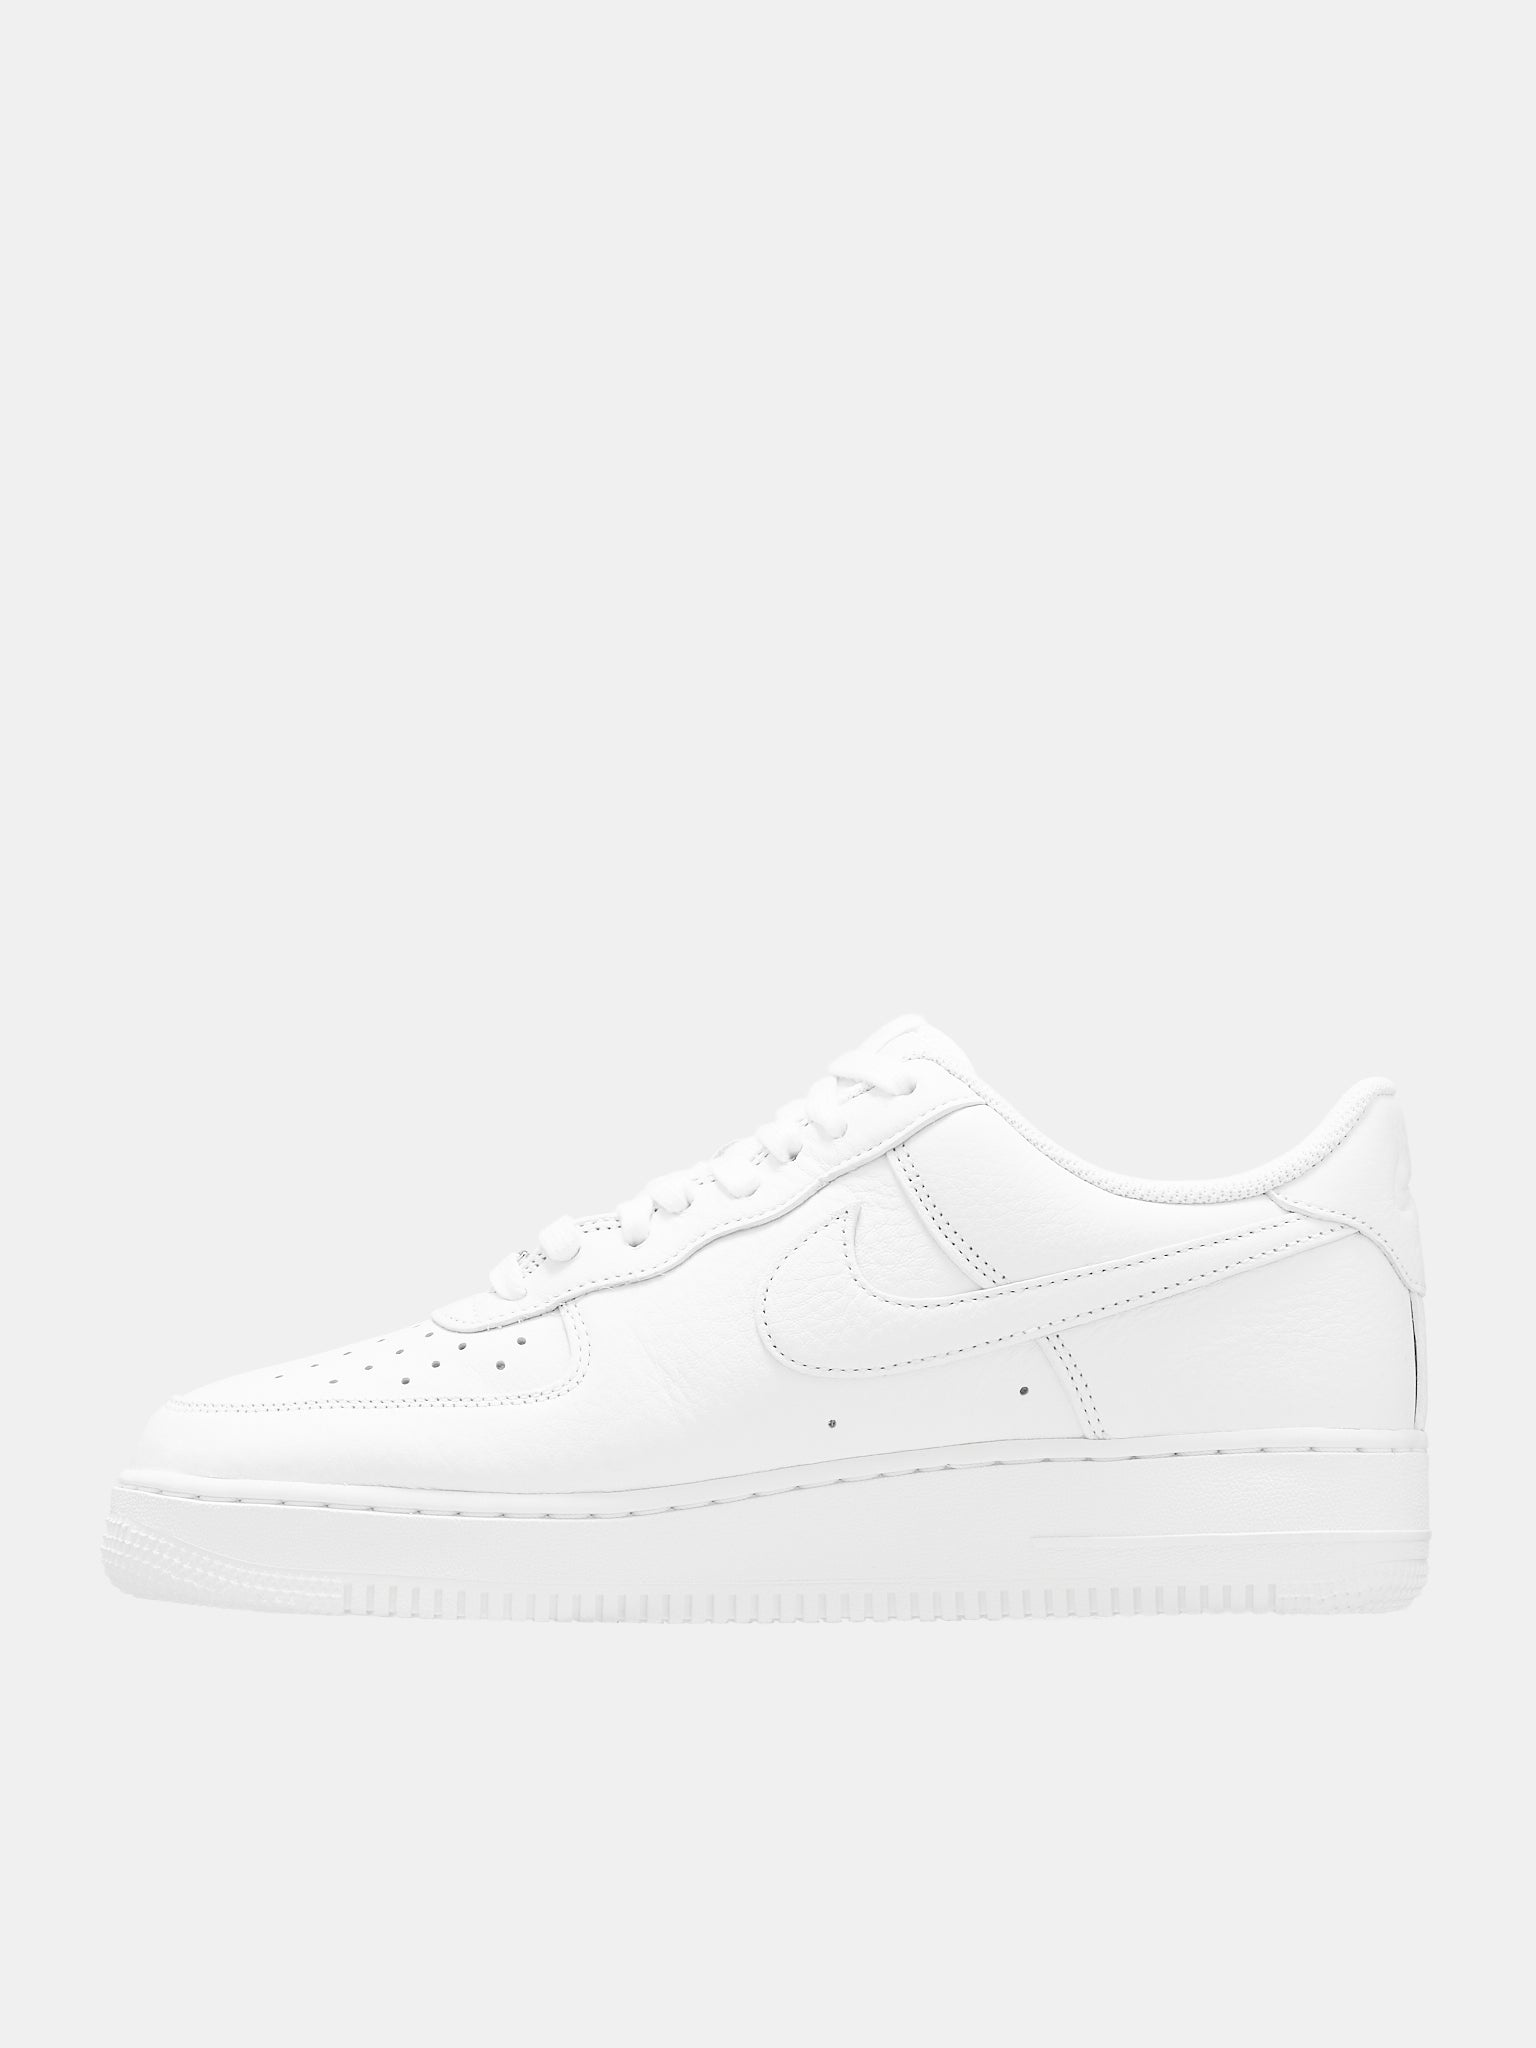 Alyx Air Force 1 Low - 3